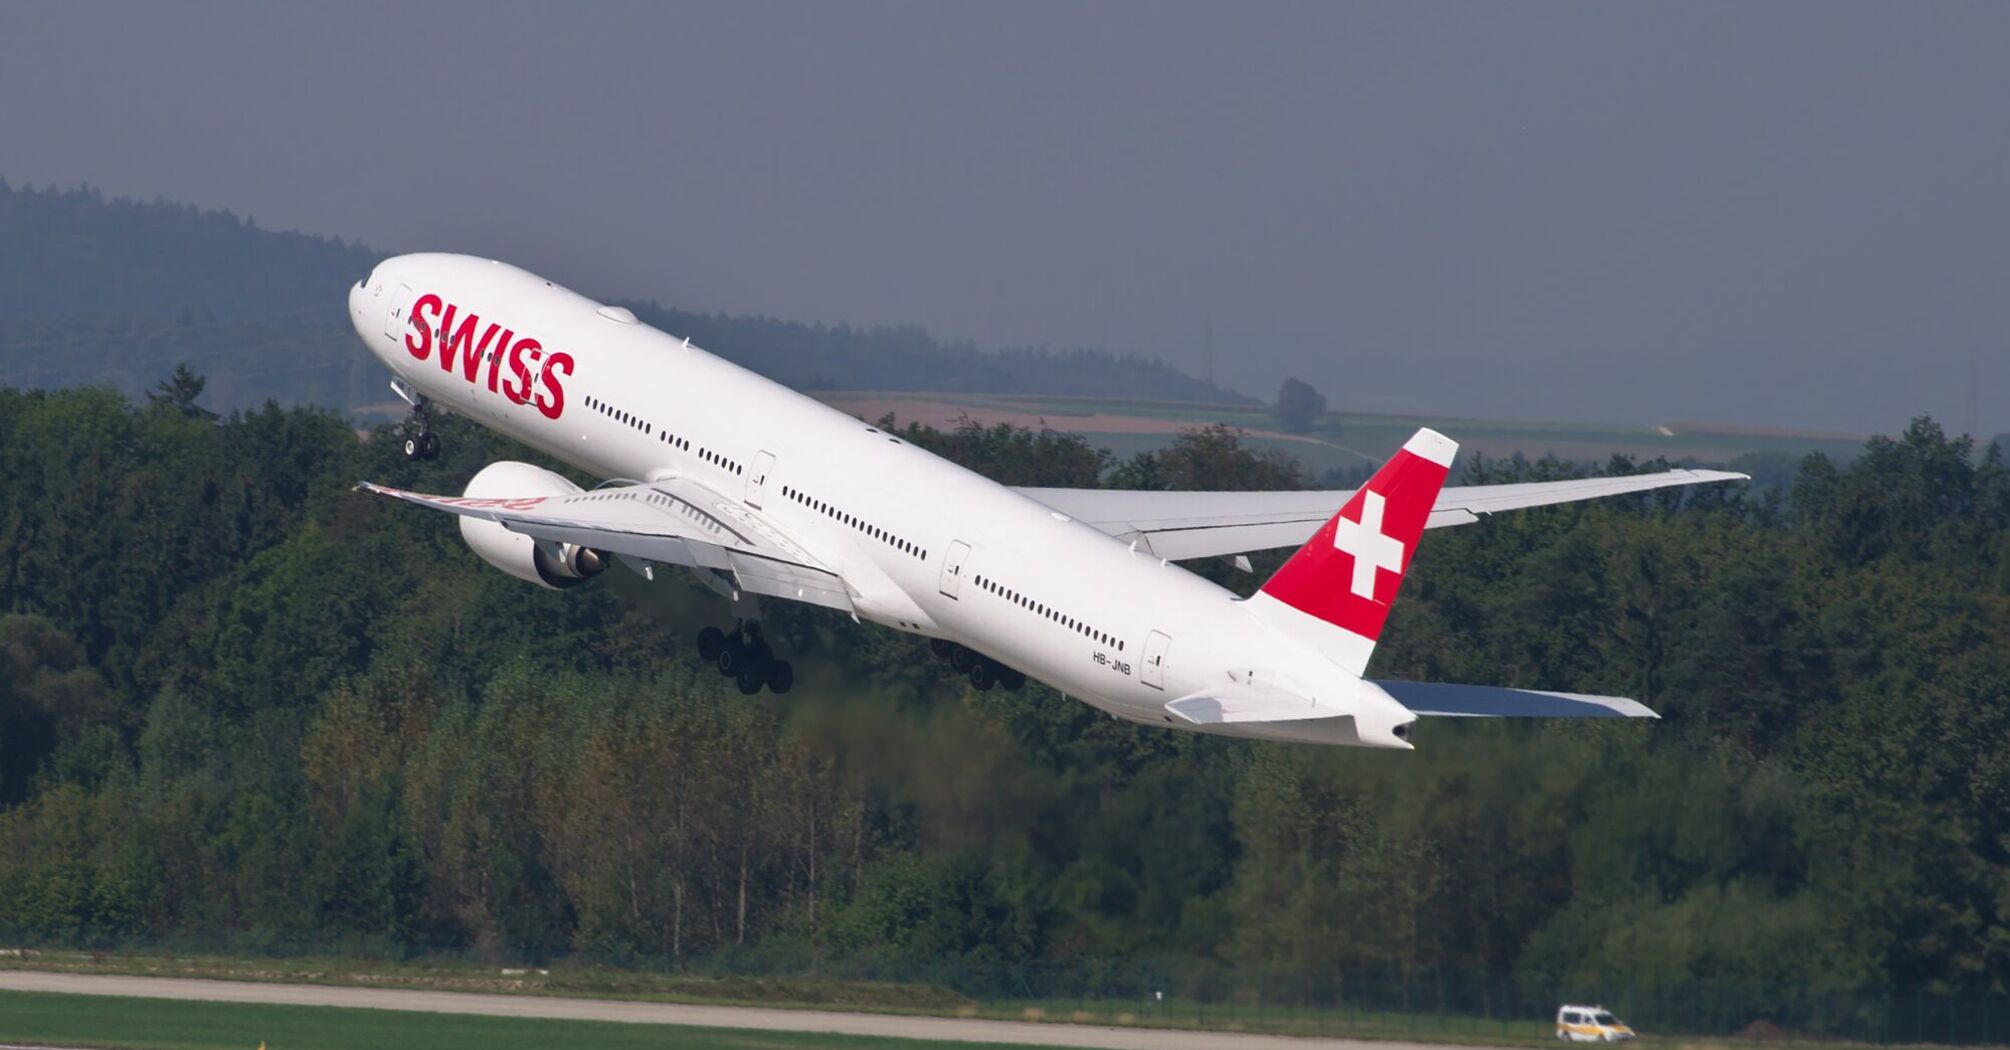 SWISS airplane taking off from the runway